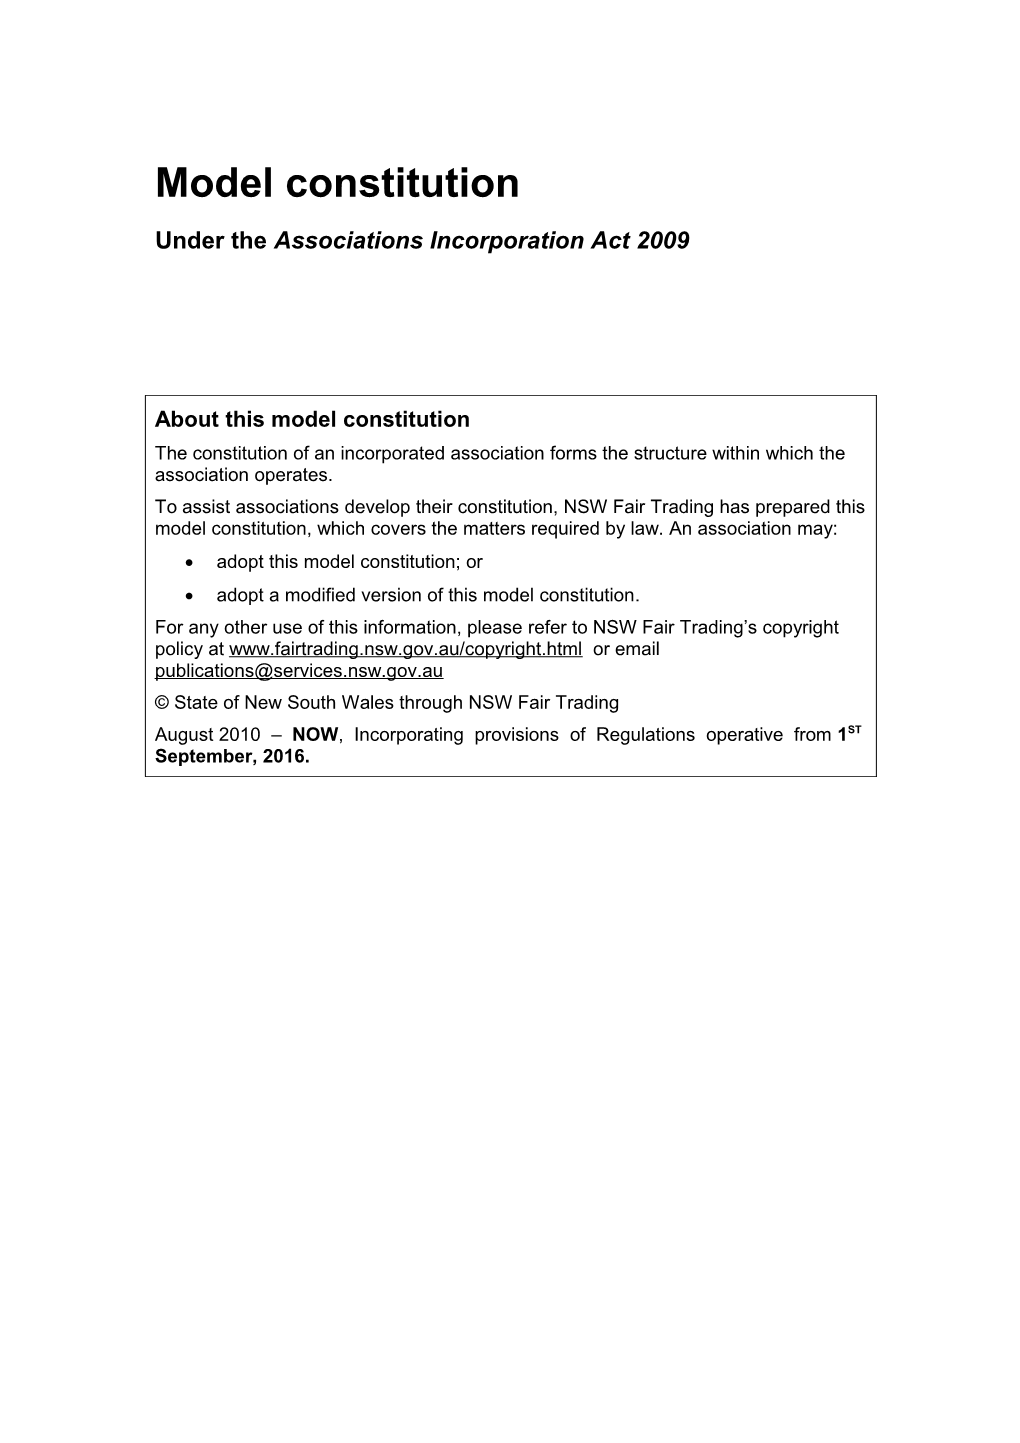 Under the Associations Incorporation Act 2009